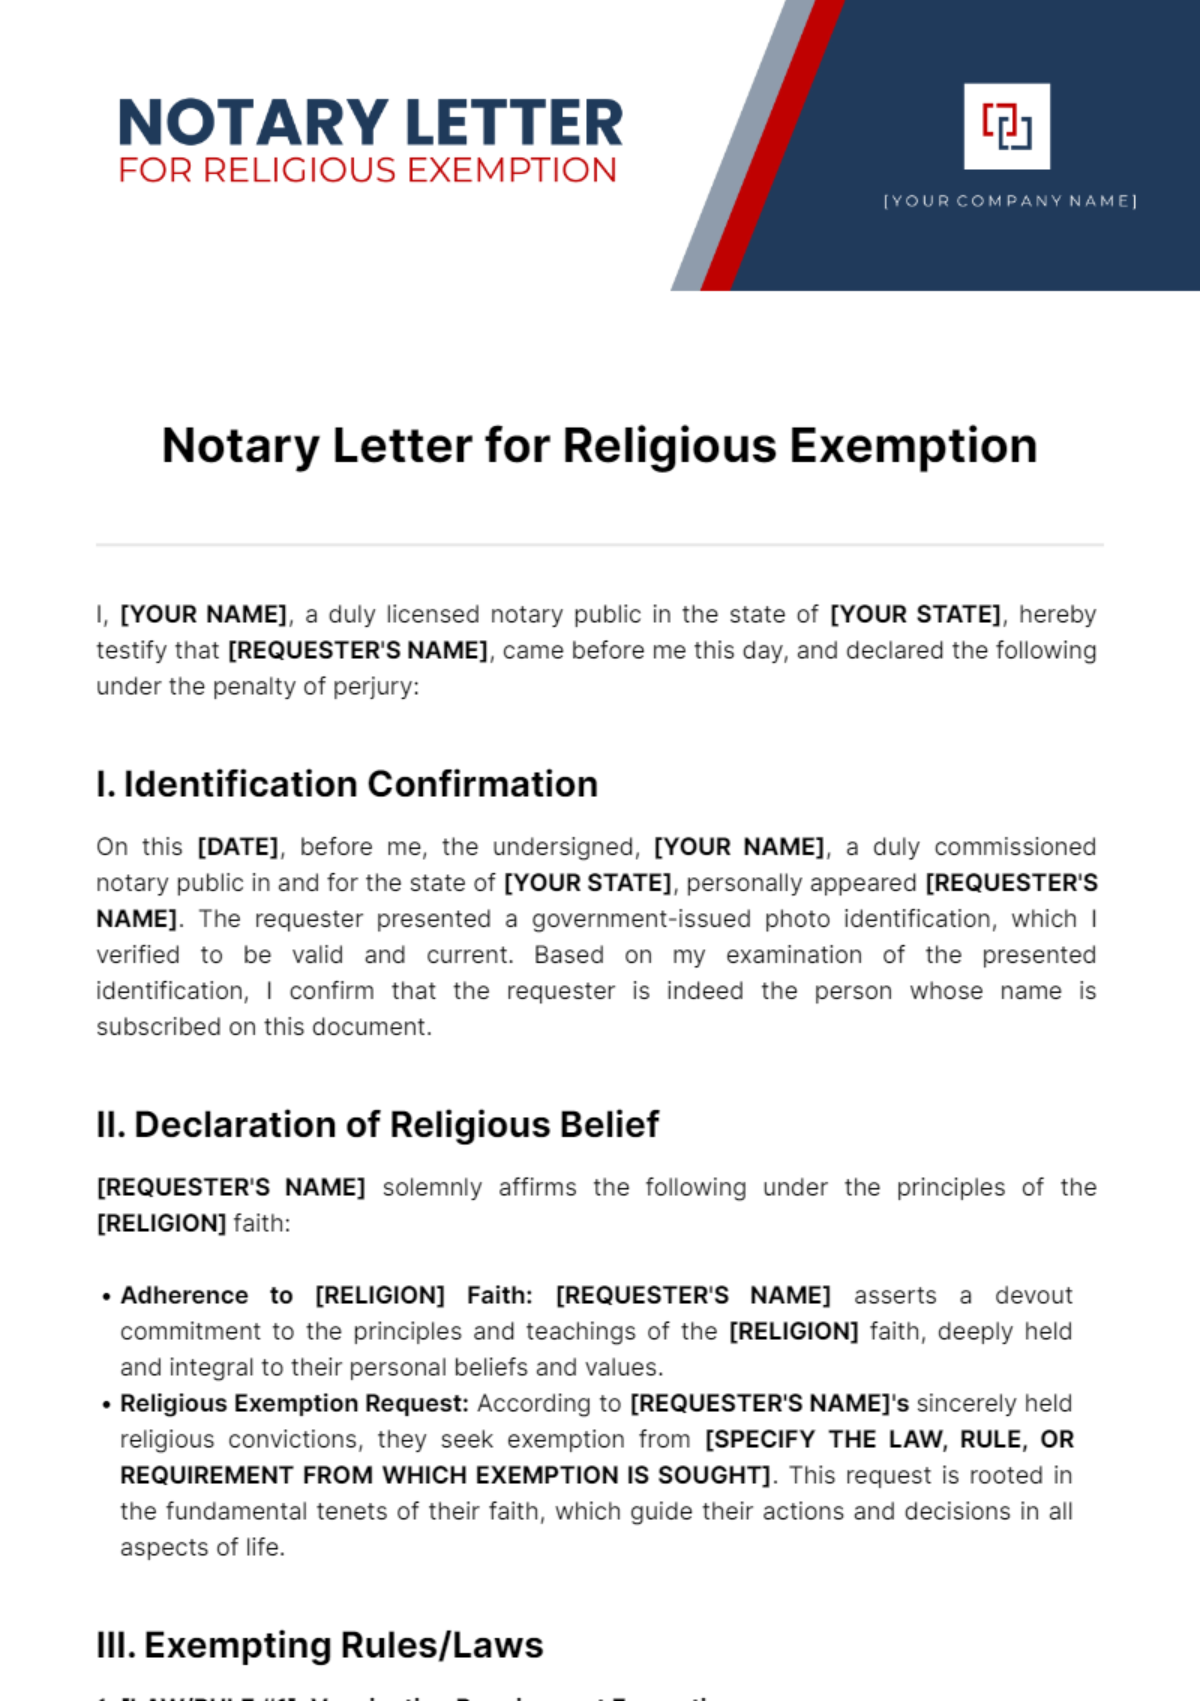 Free Notary Letter for Religious Exemption Template